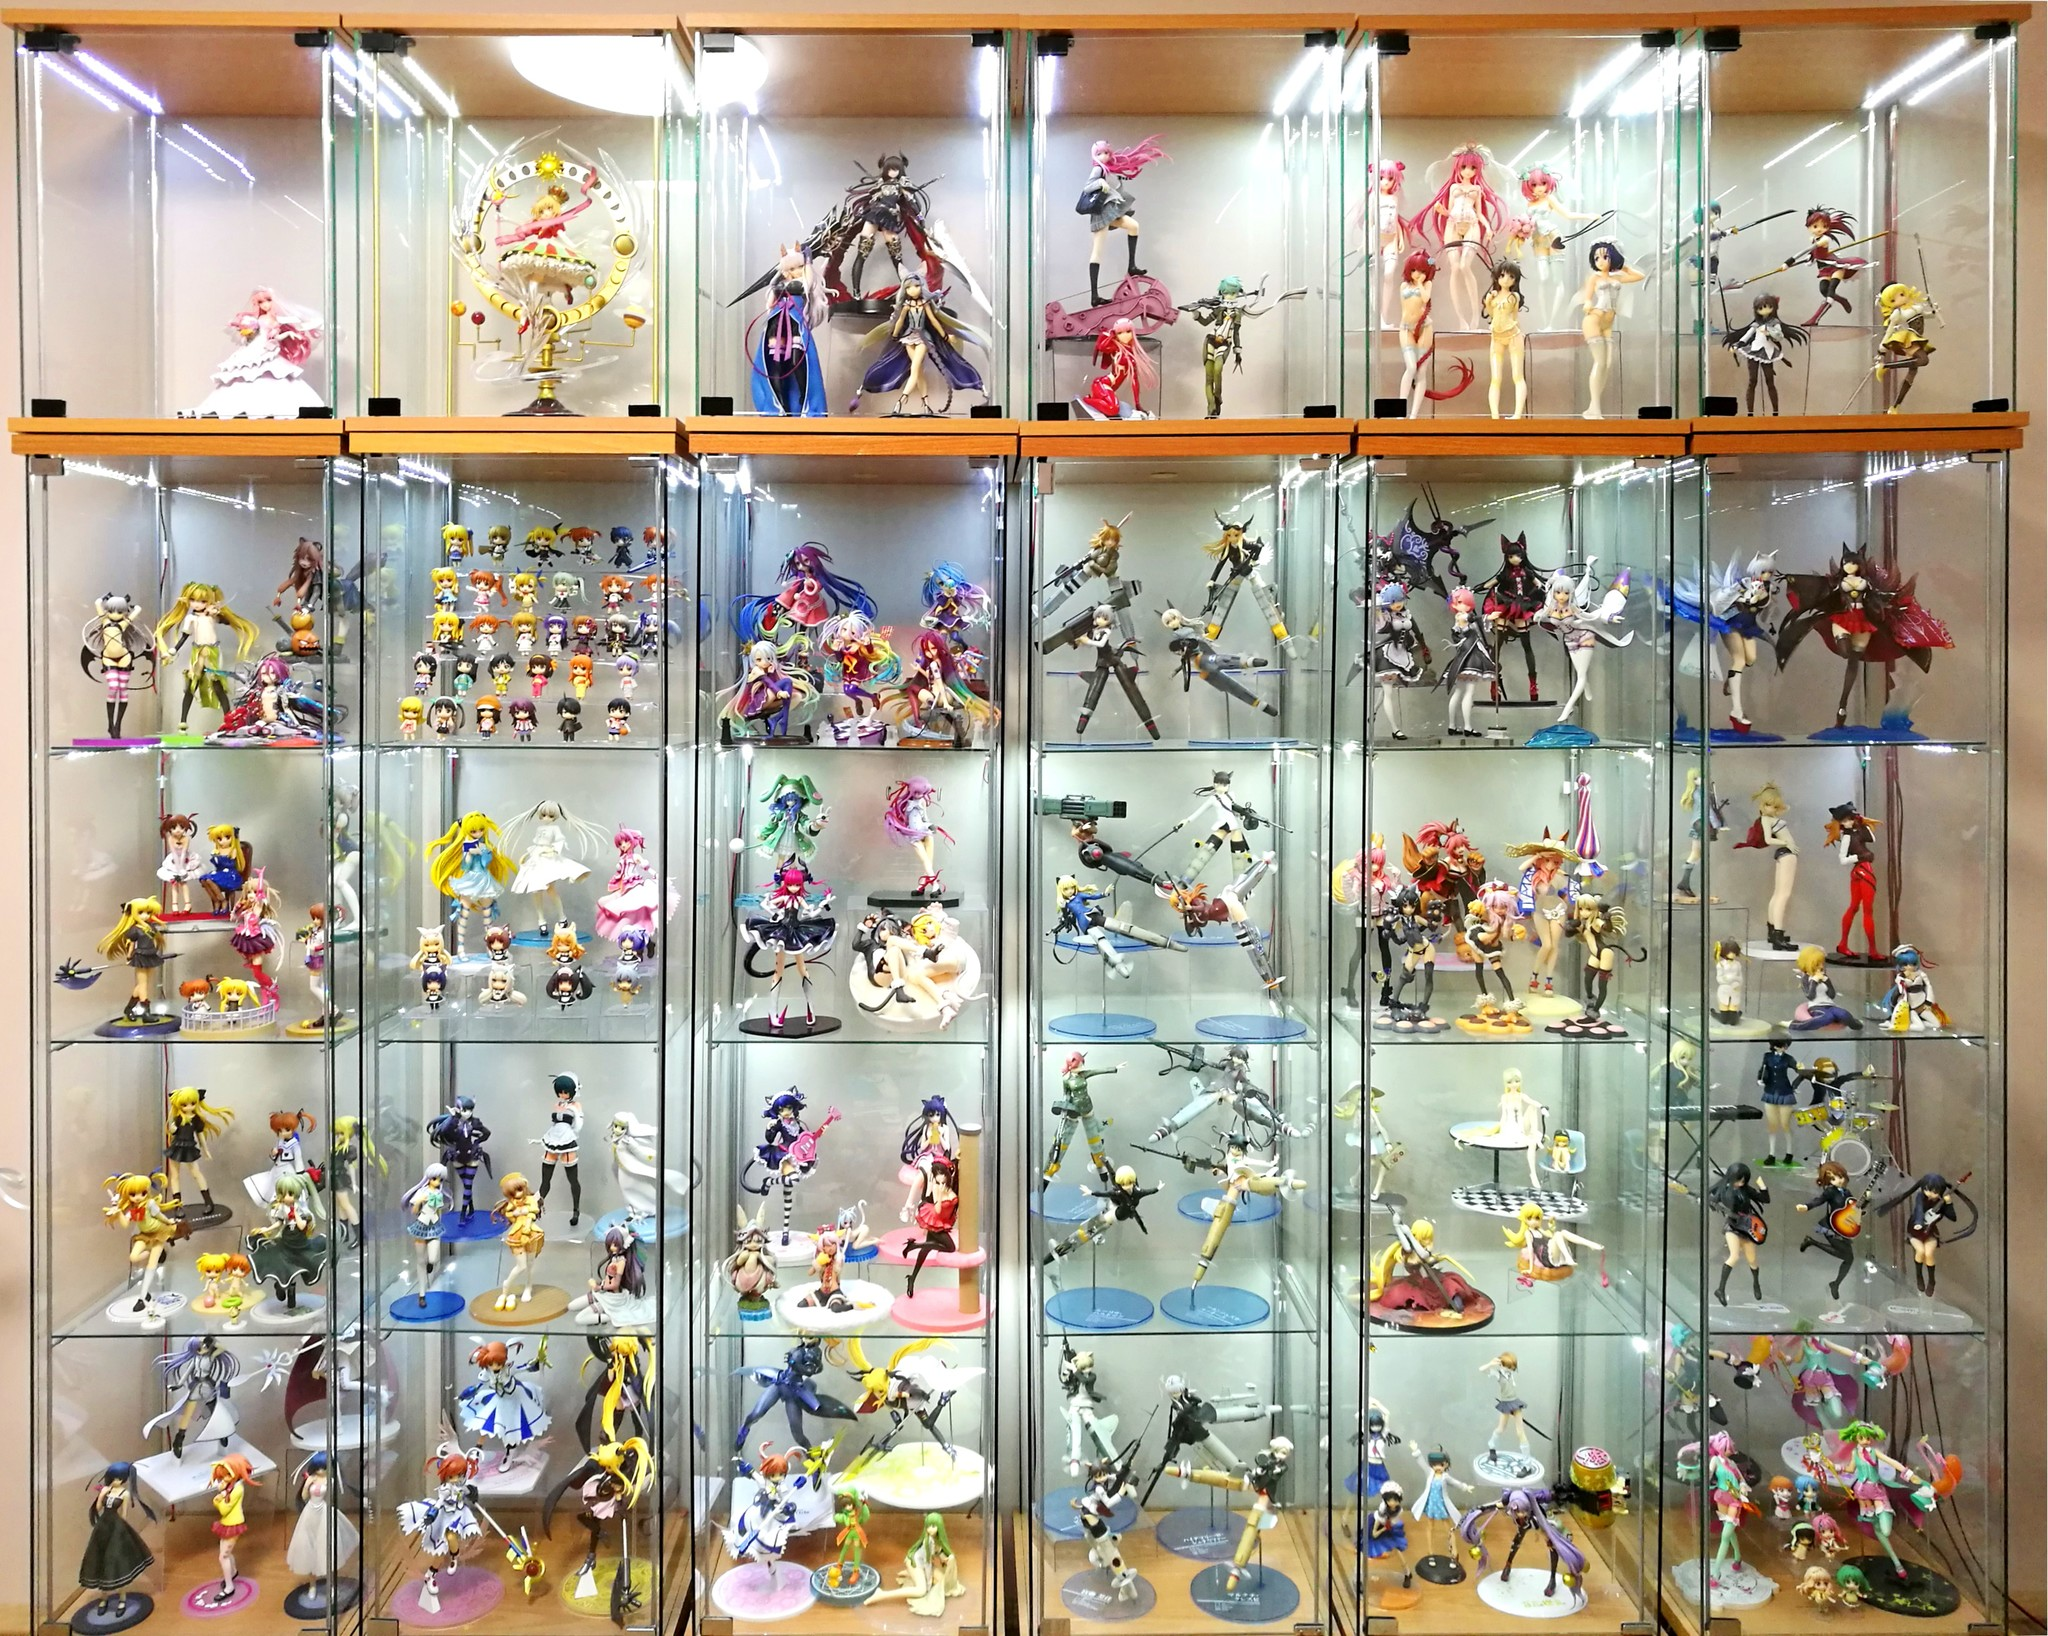 30 Amazing Action Figure Display Ideas To Your Hobbies  HomeMydesign